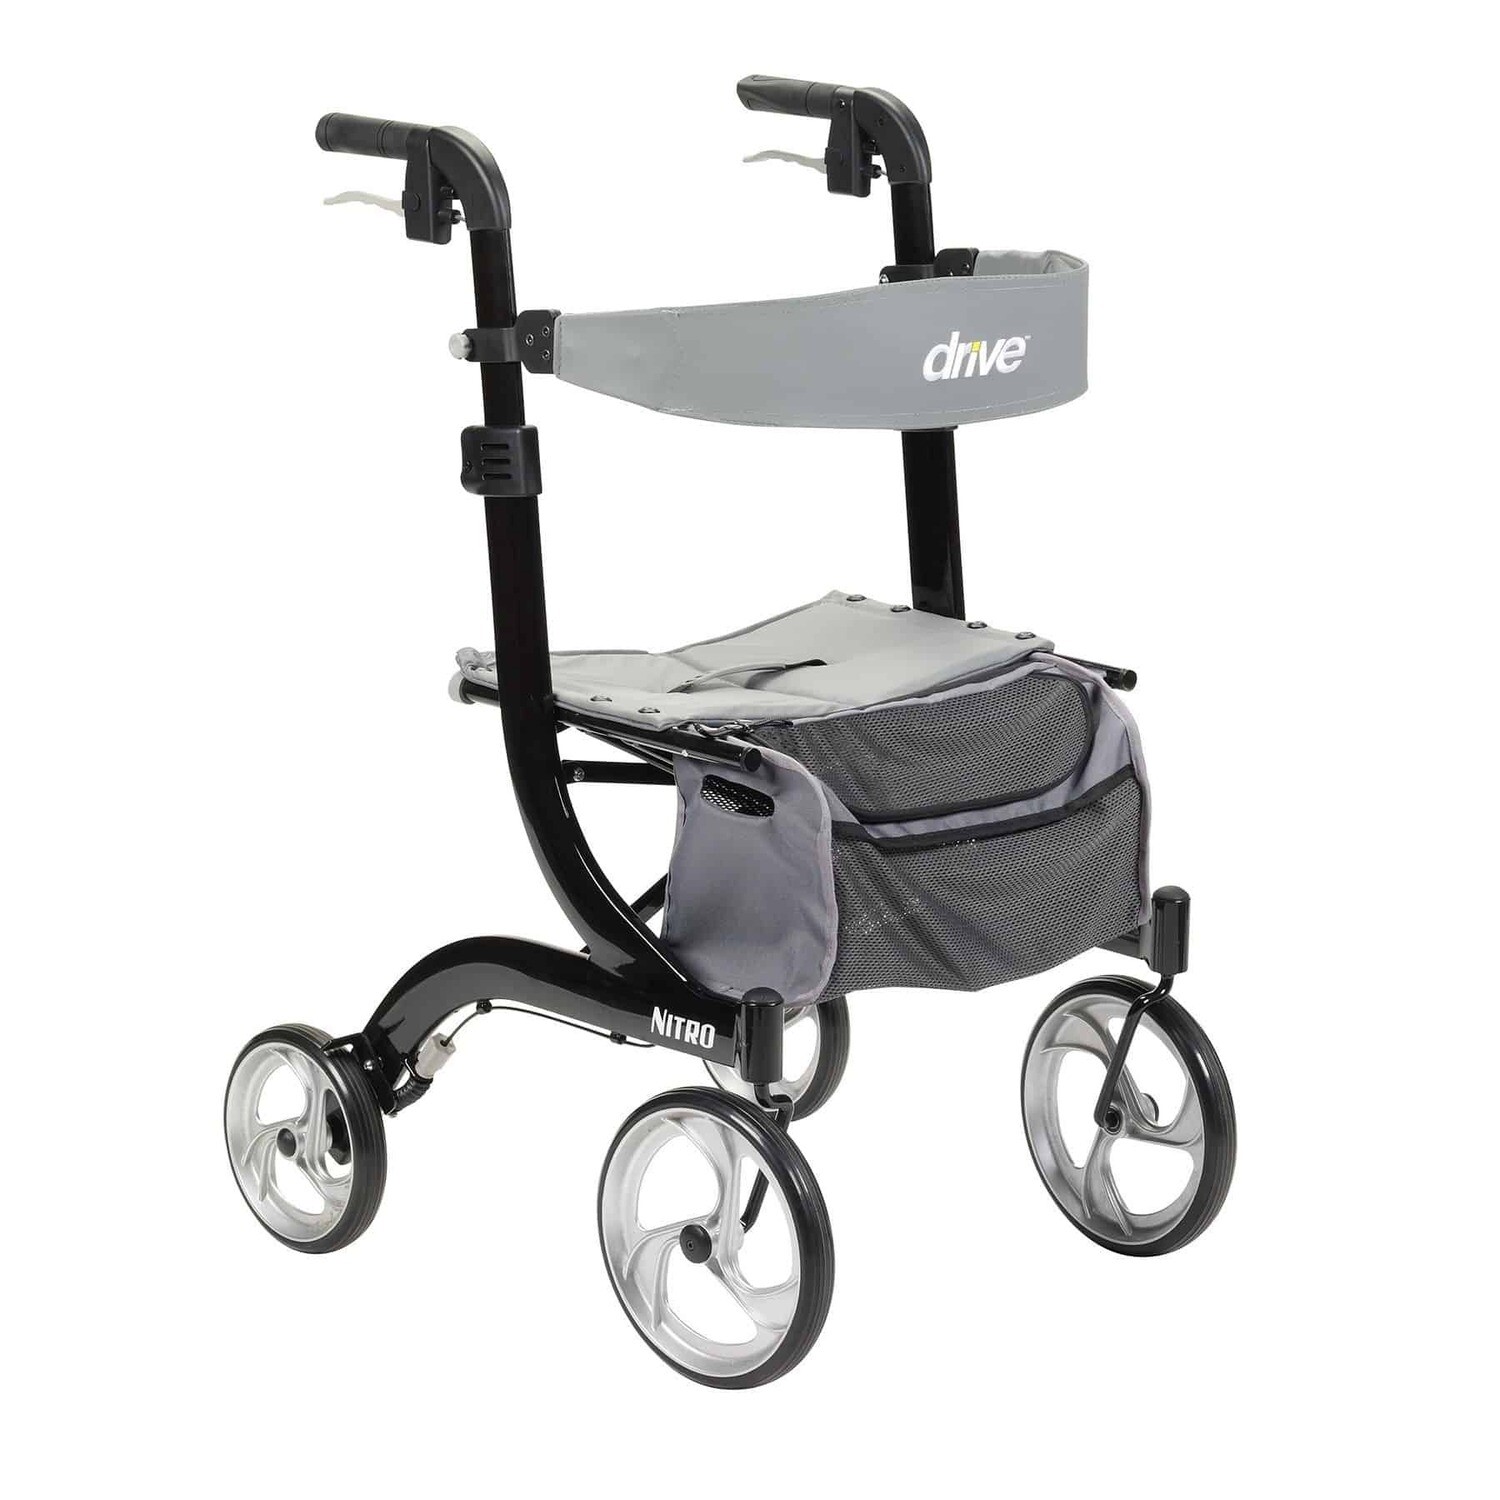 Drive Nitro Aluminum Rollator, 10″ Casters (Height Adjustable, Removable Back Support, Seat and Lever Locks)